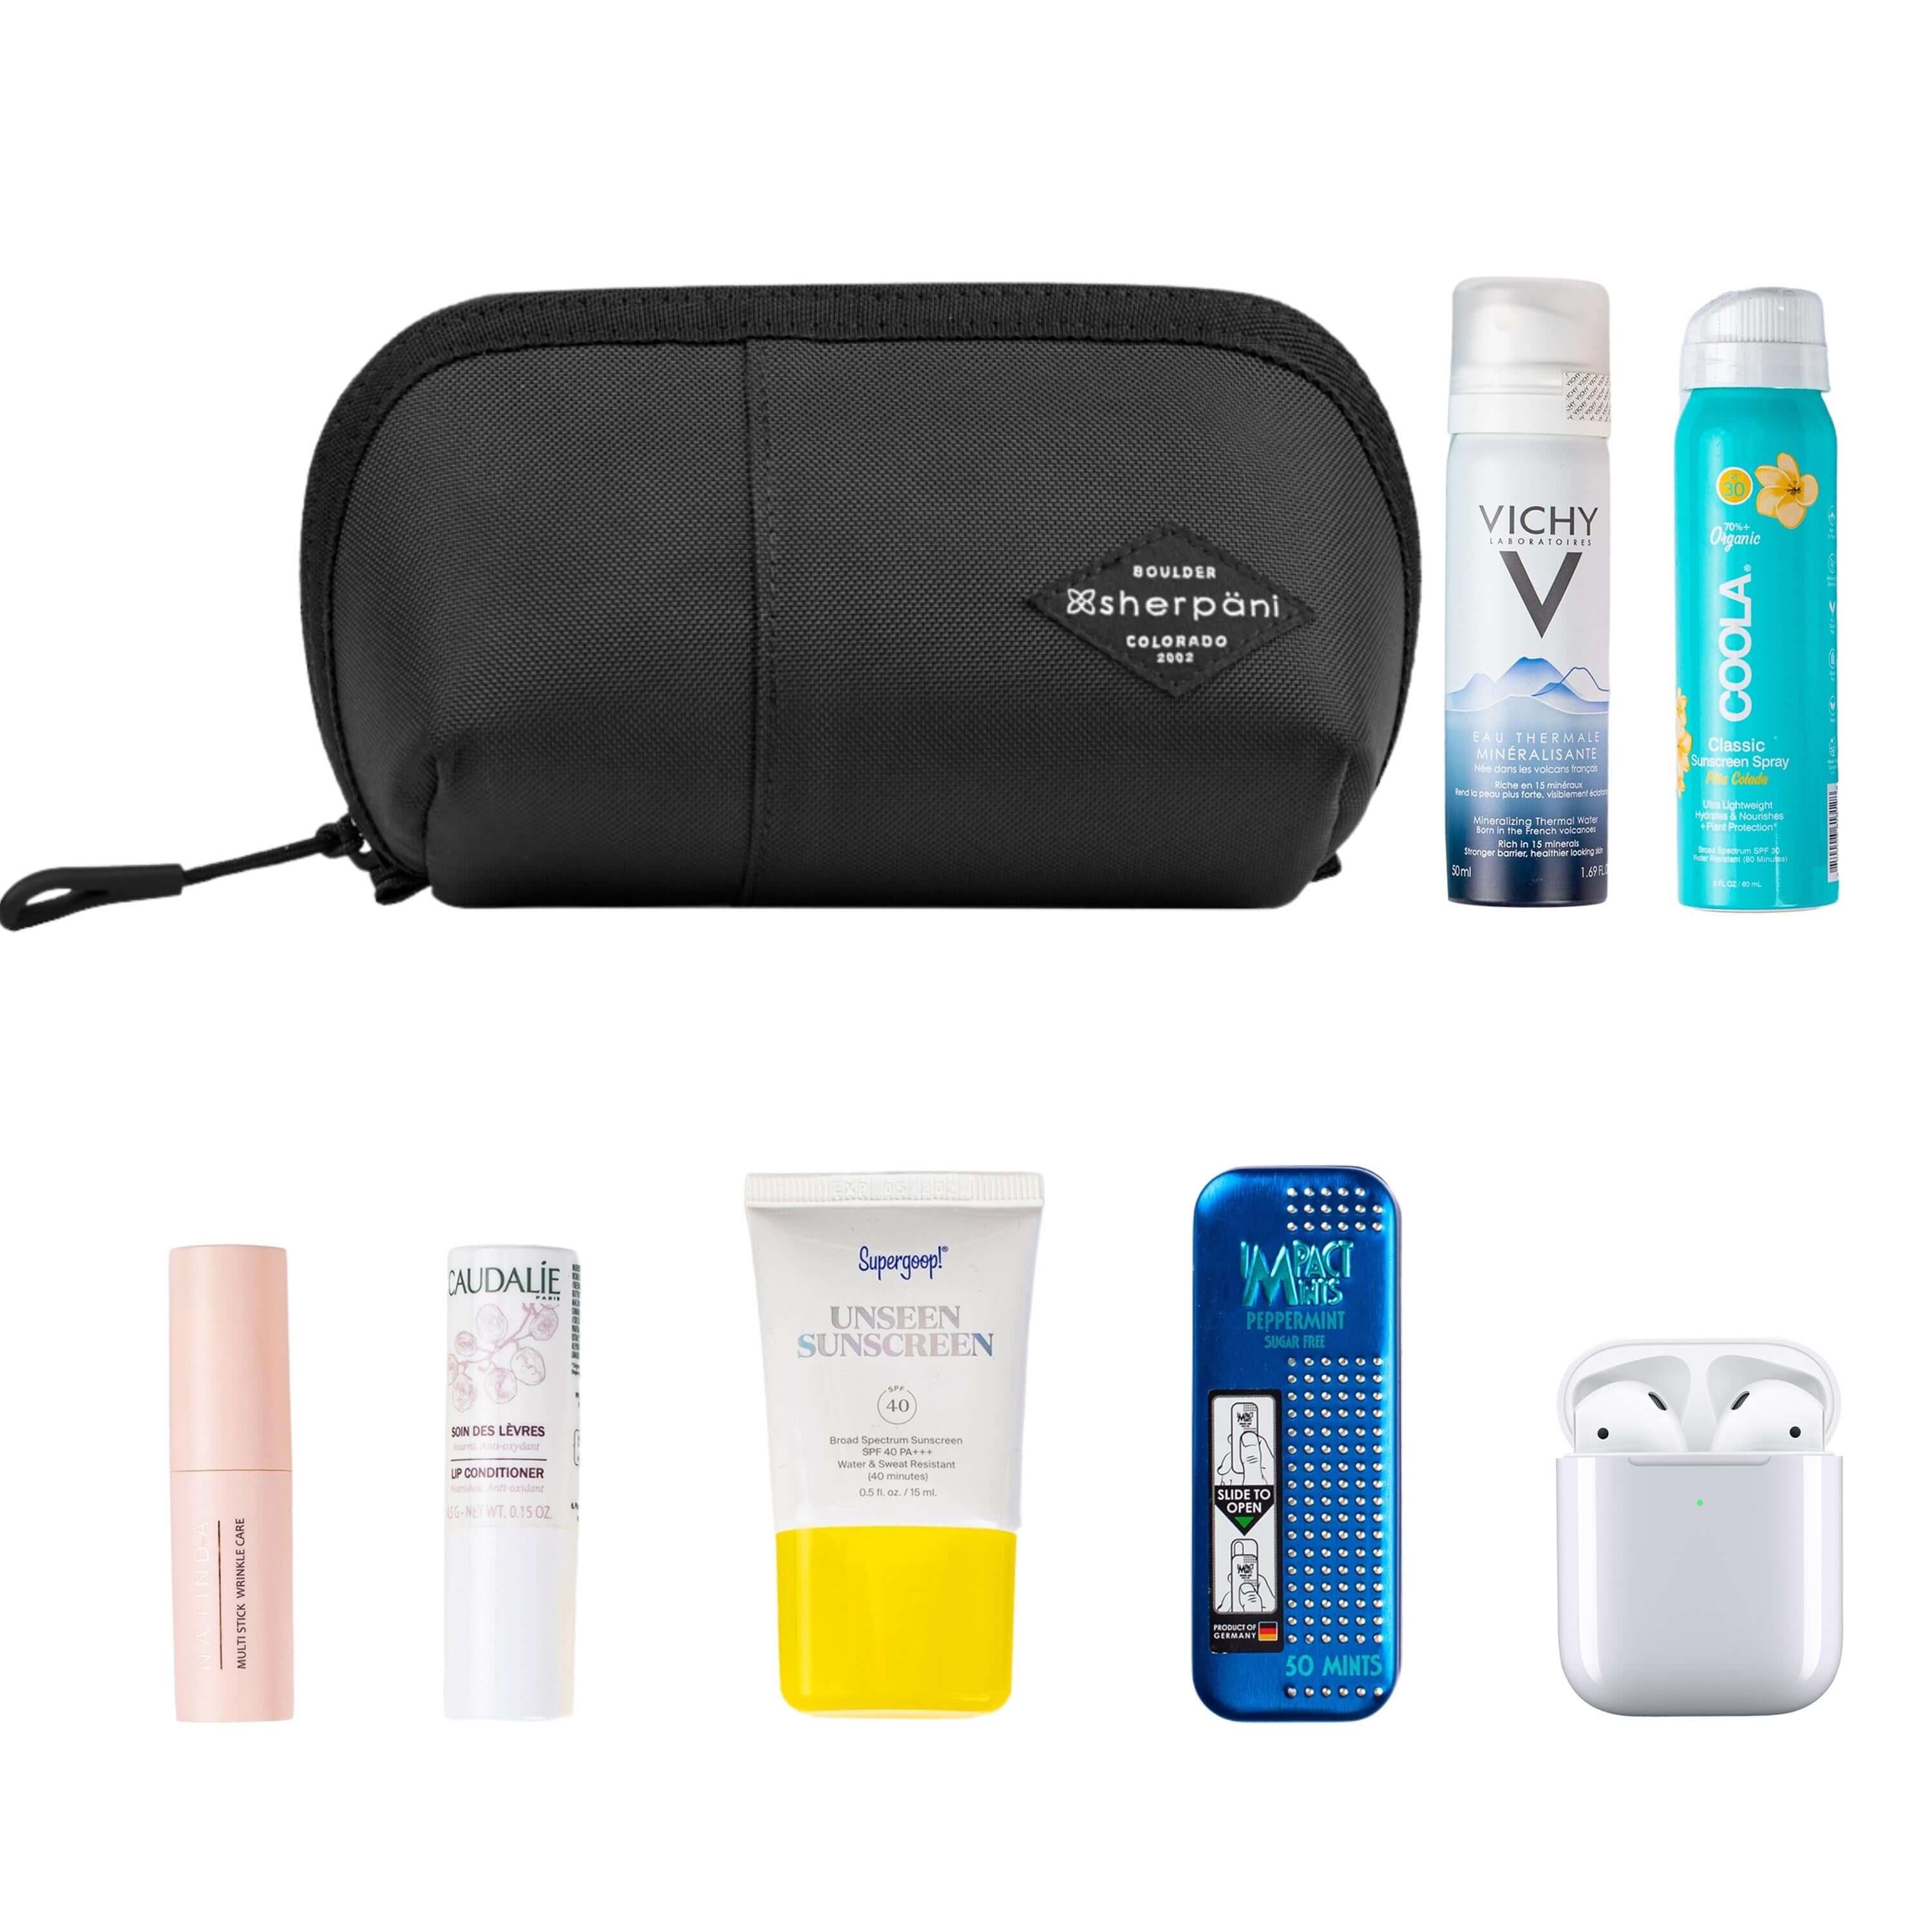 Top view of example items to fill the bag. Sherpani travel accessory, the Harmony in Raven, is shown in the upper left corner. It is surrounded by an assortment of items: beauty products, skincare products, sunscreen, mints and AirPods.